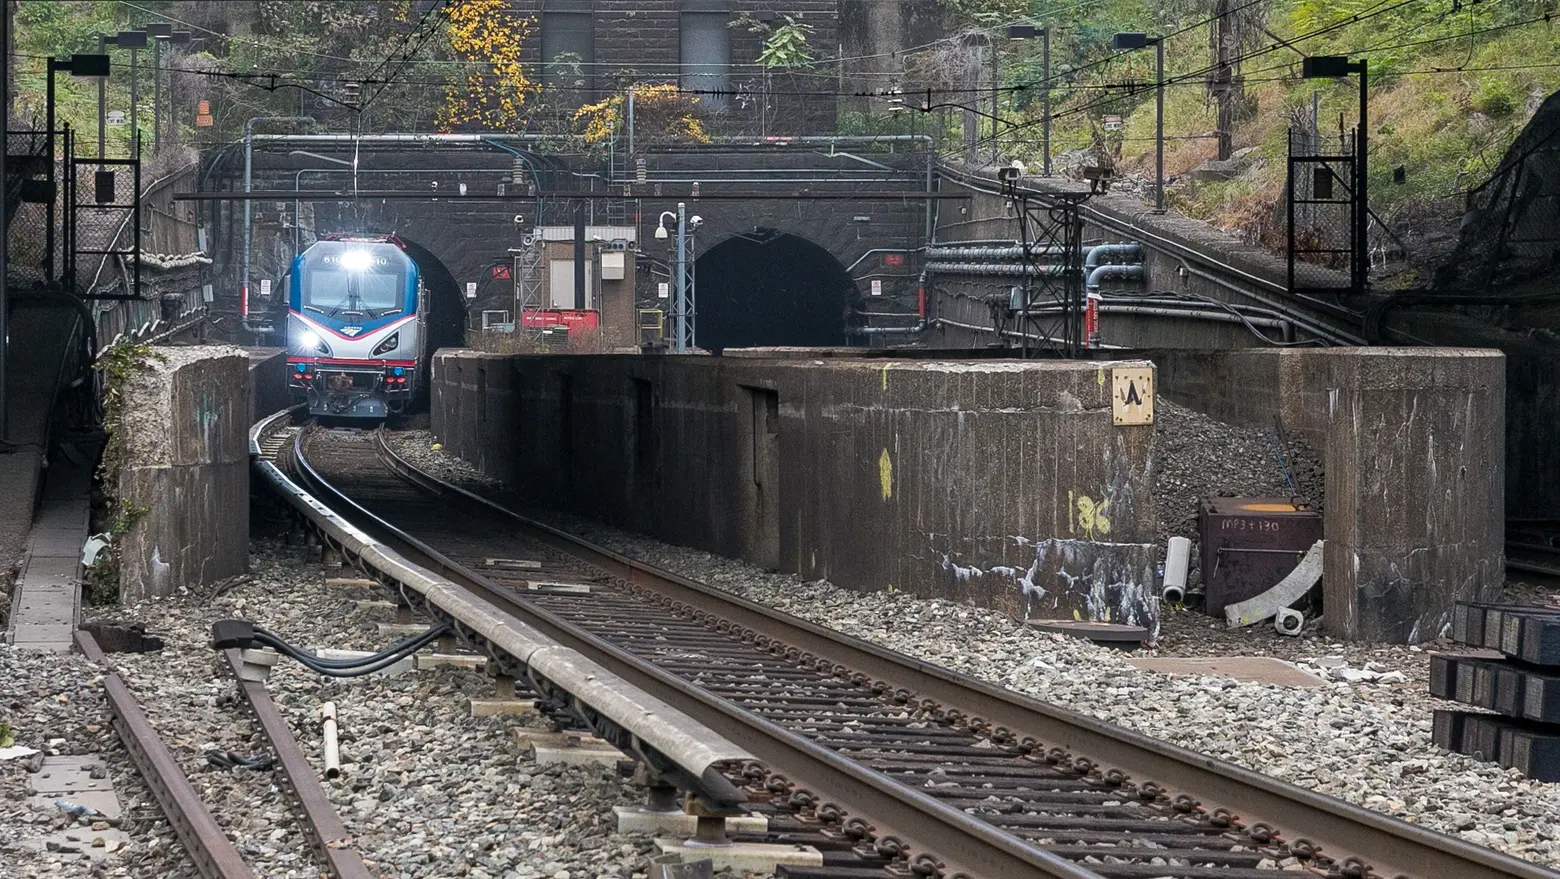 Amtrak’s Hudson River tunnels project could bring 3 years of traffic jams